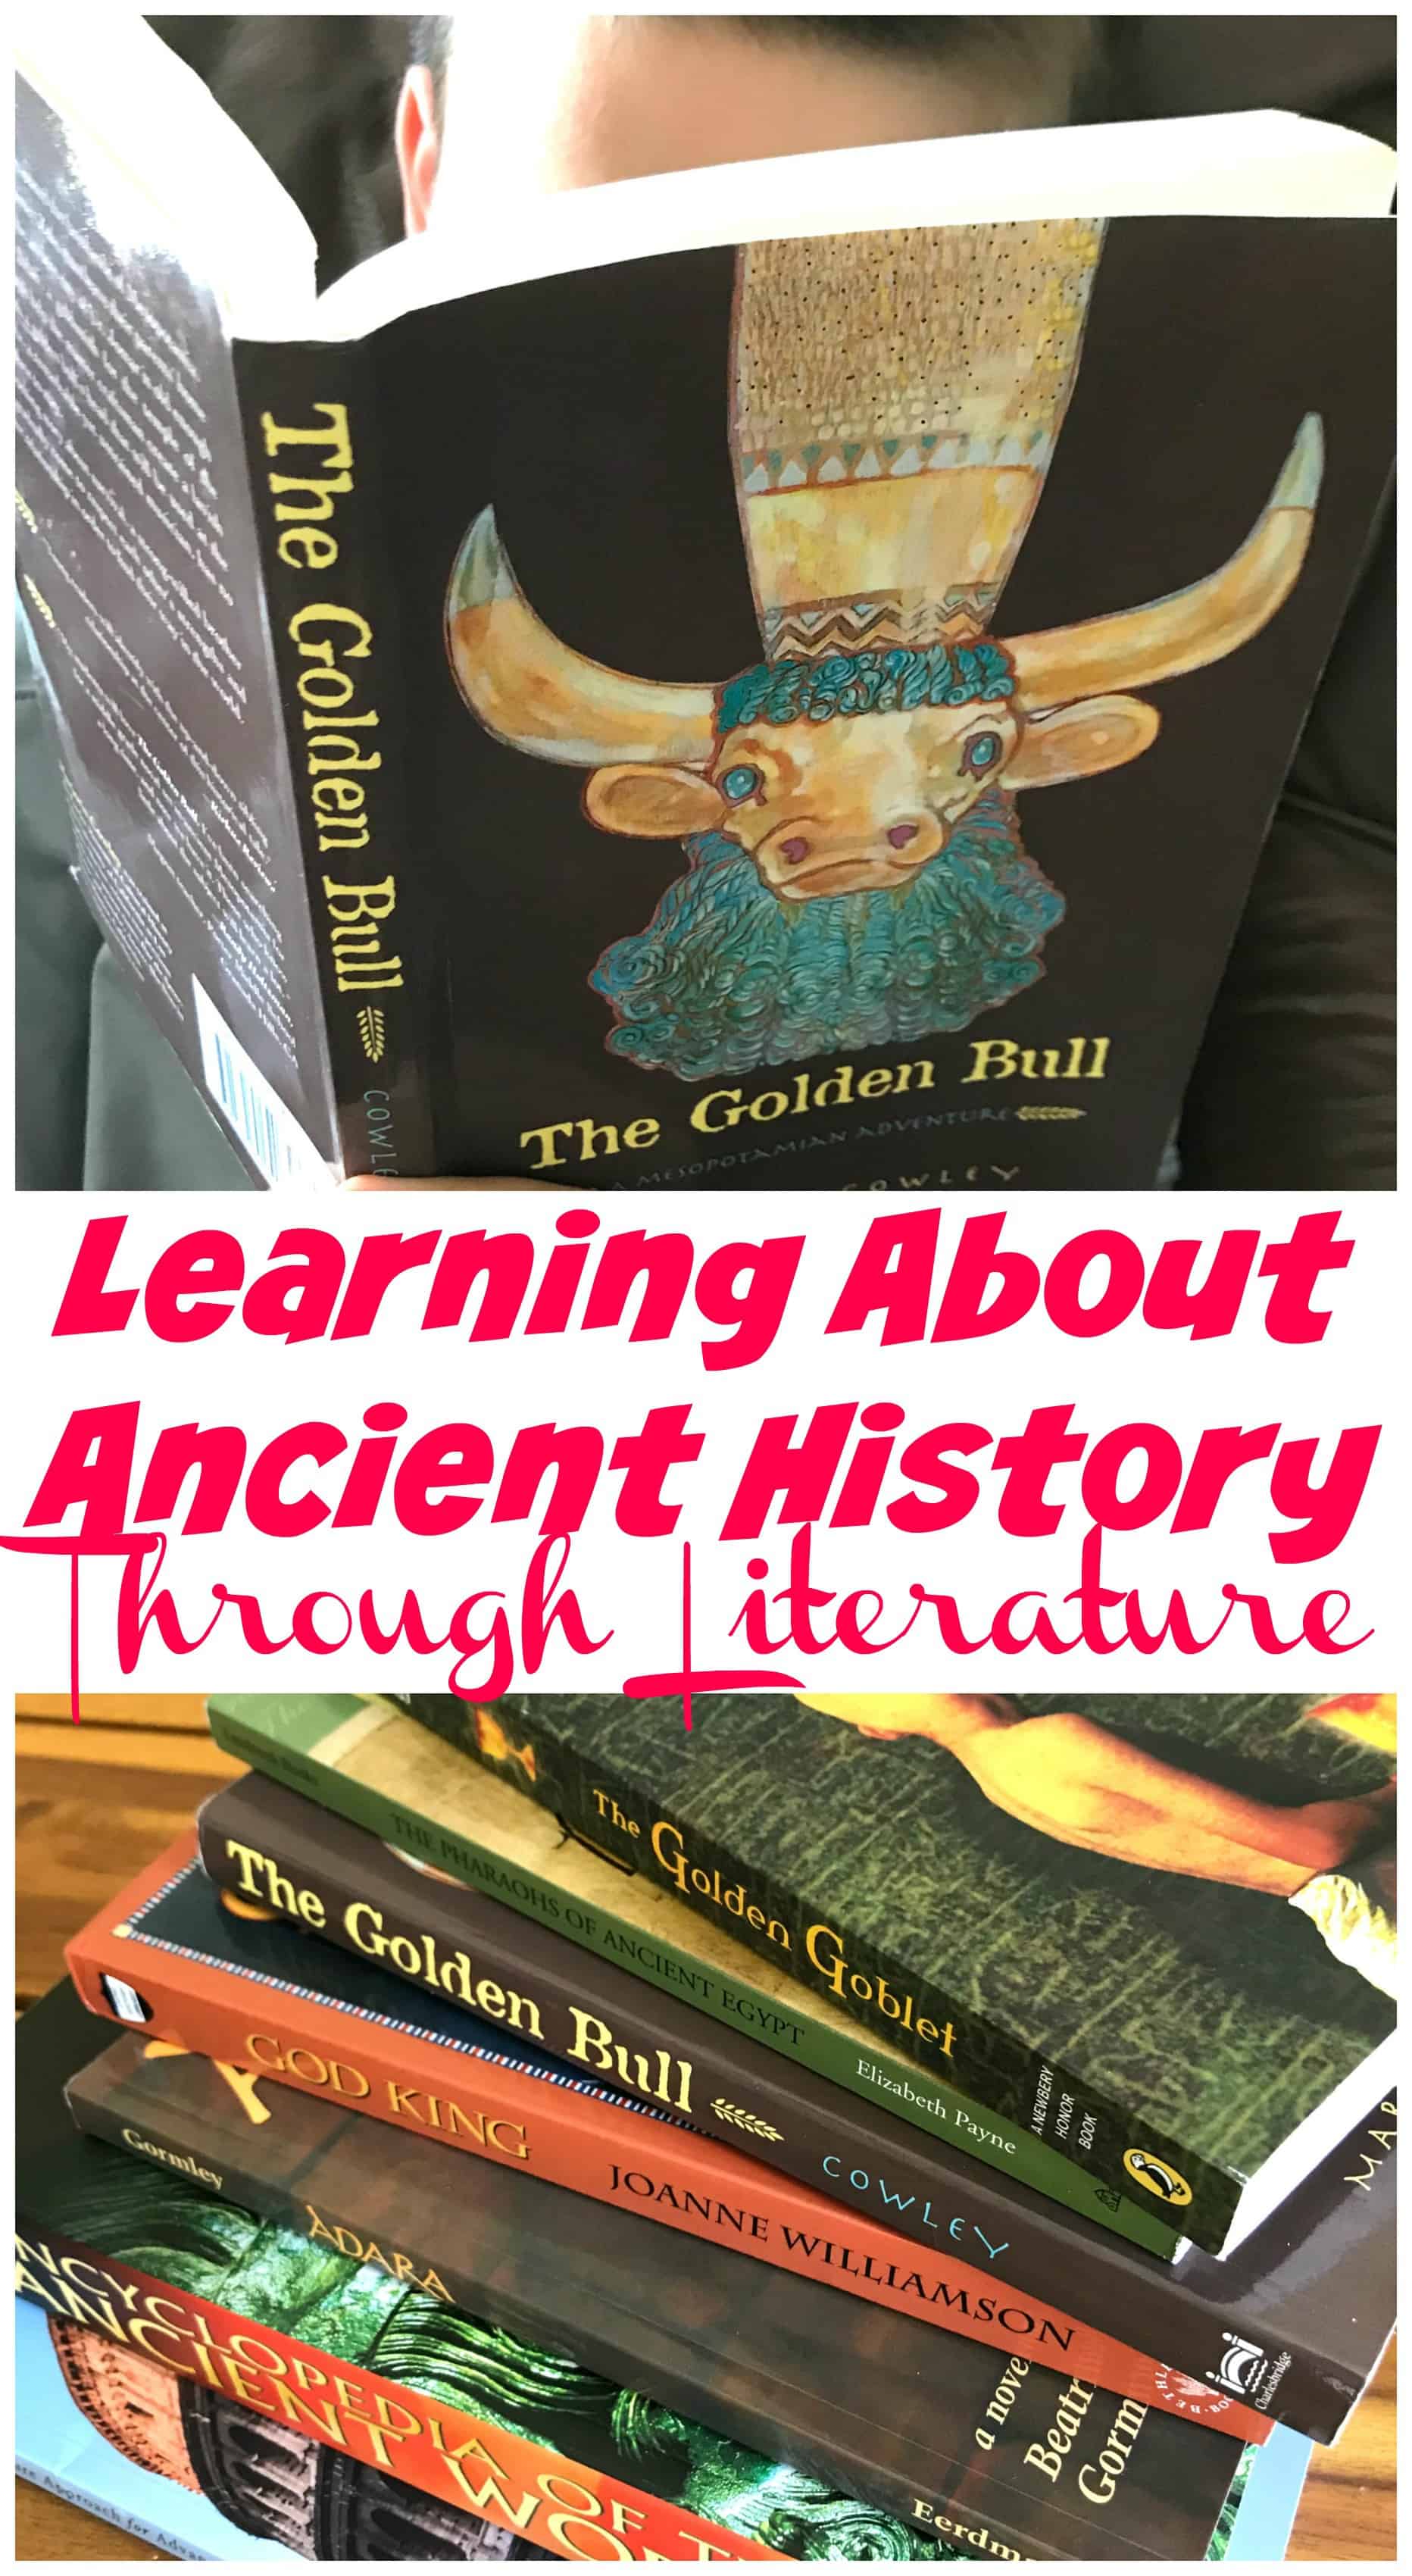 Check out the fun and engaging way we have explored Ancient History through Literature!! You will love it as much as we did!